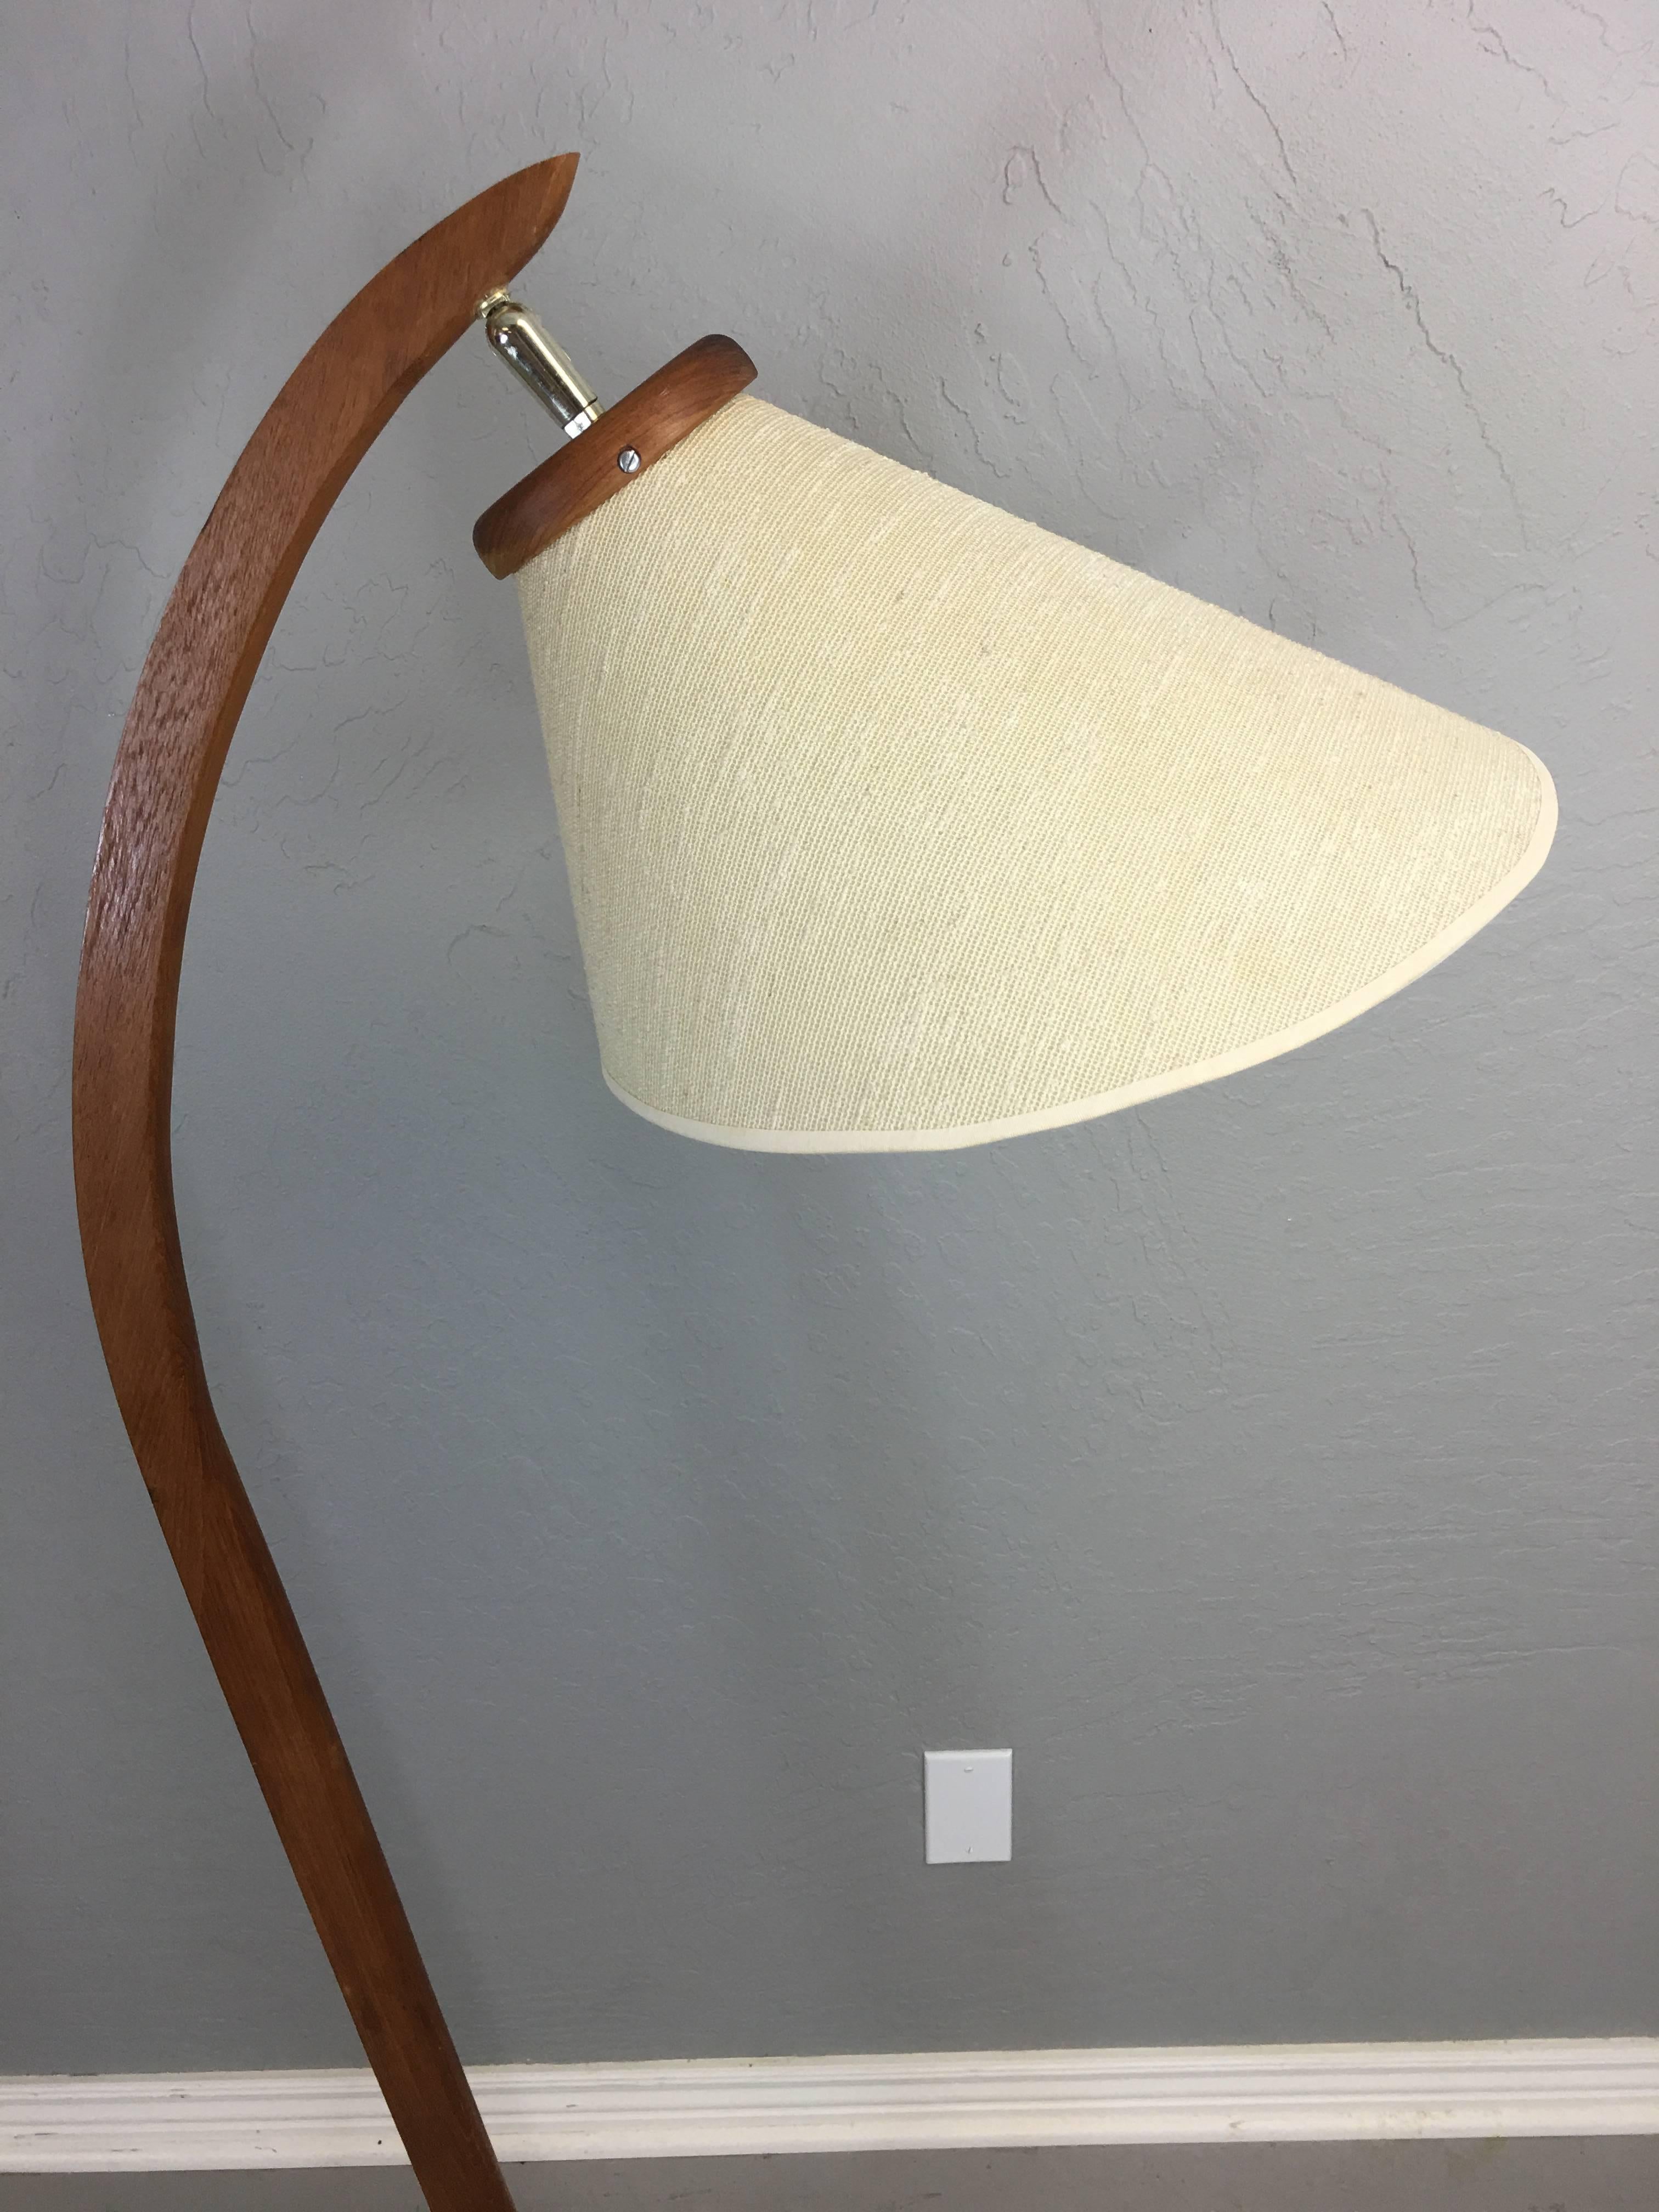 Danish inspired teak floor lamp made in Canada. No other information to identify maker. The flared shade is original and without stains. The switch is under the shade. It stands 60